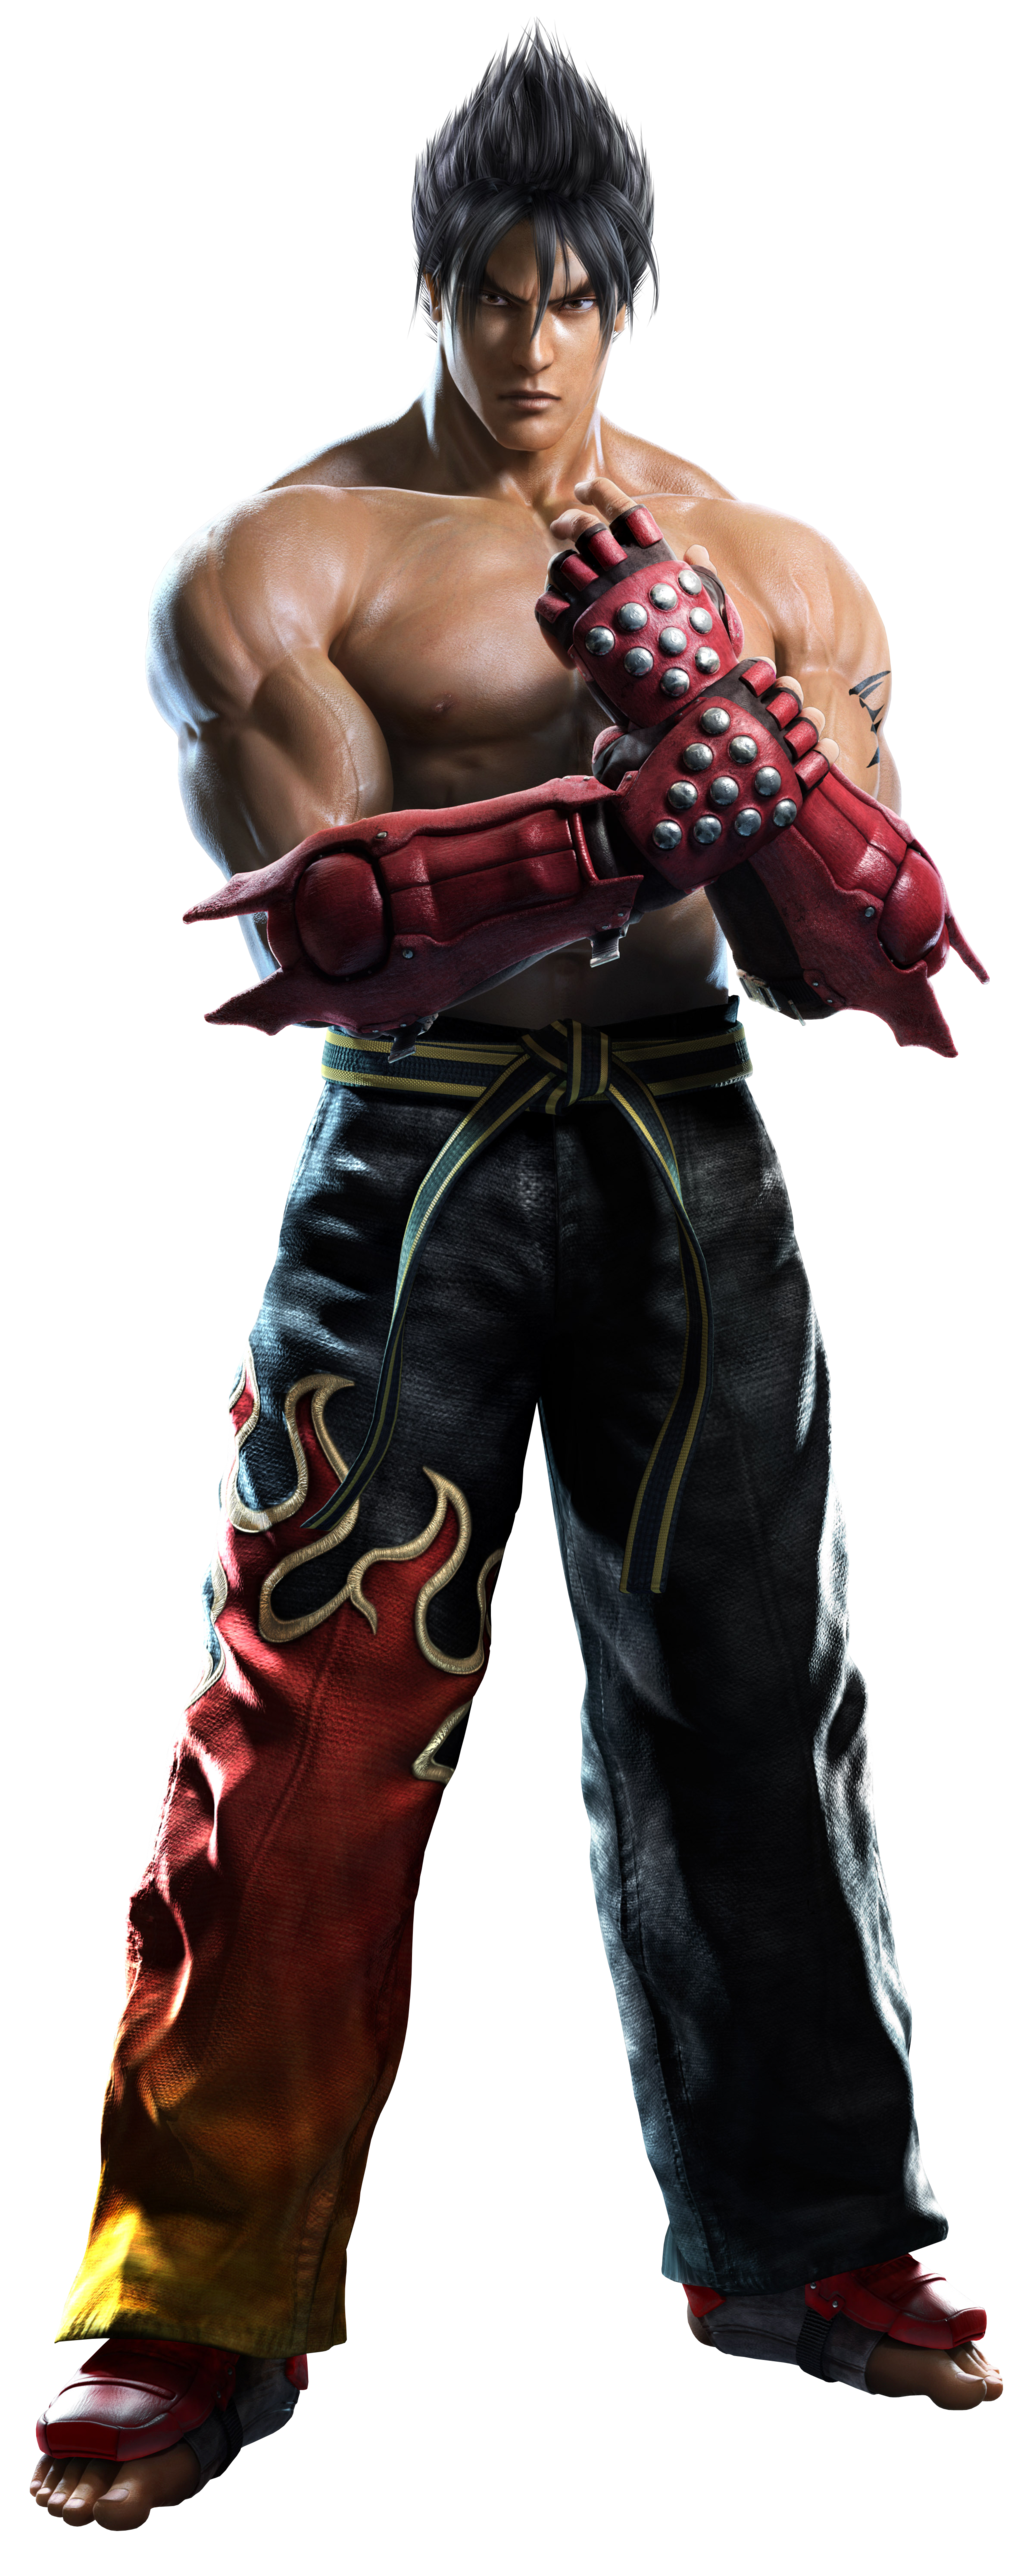 Pin by Deonte Bell on BlazeStar and The Protectors  Jin kazama Cute anime  guys Anime character design